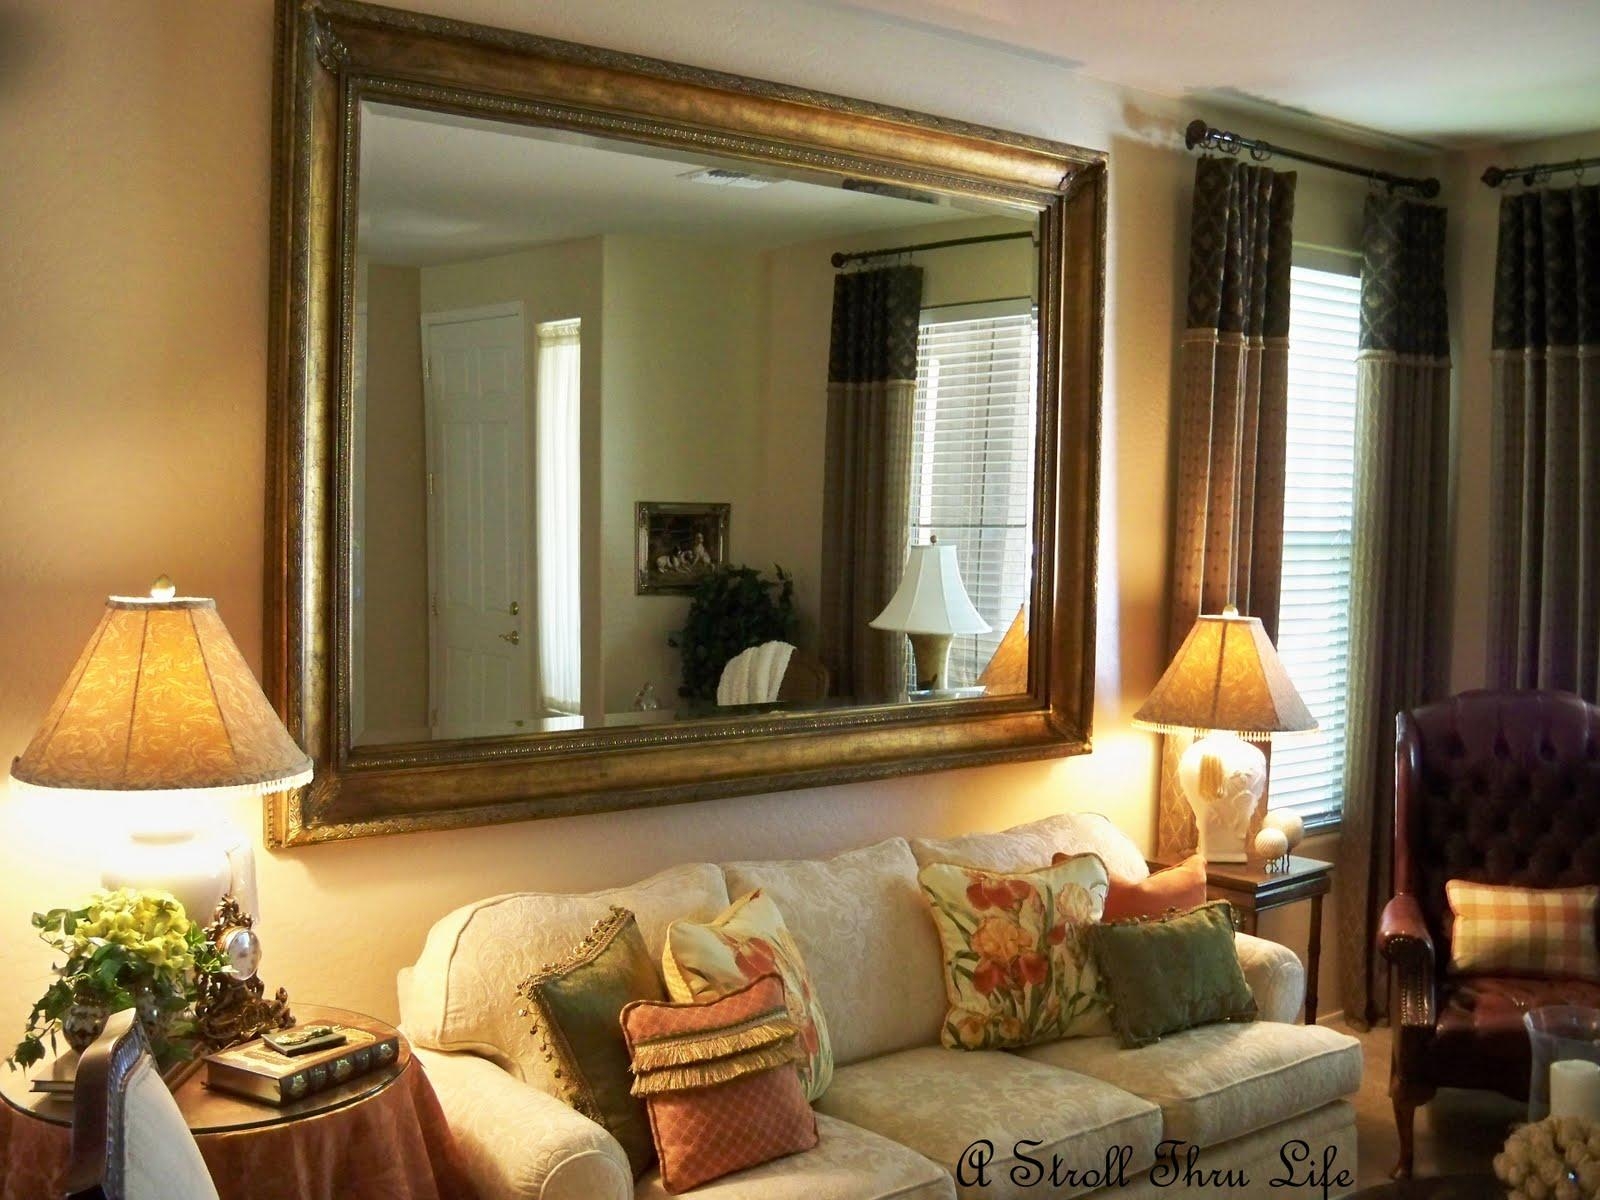 Decorating With Mirrors For Living Room Walls